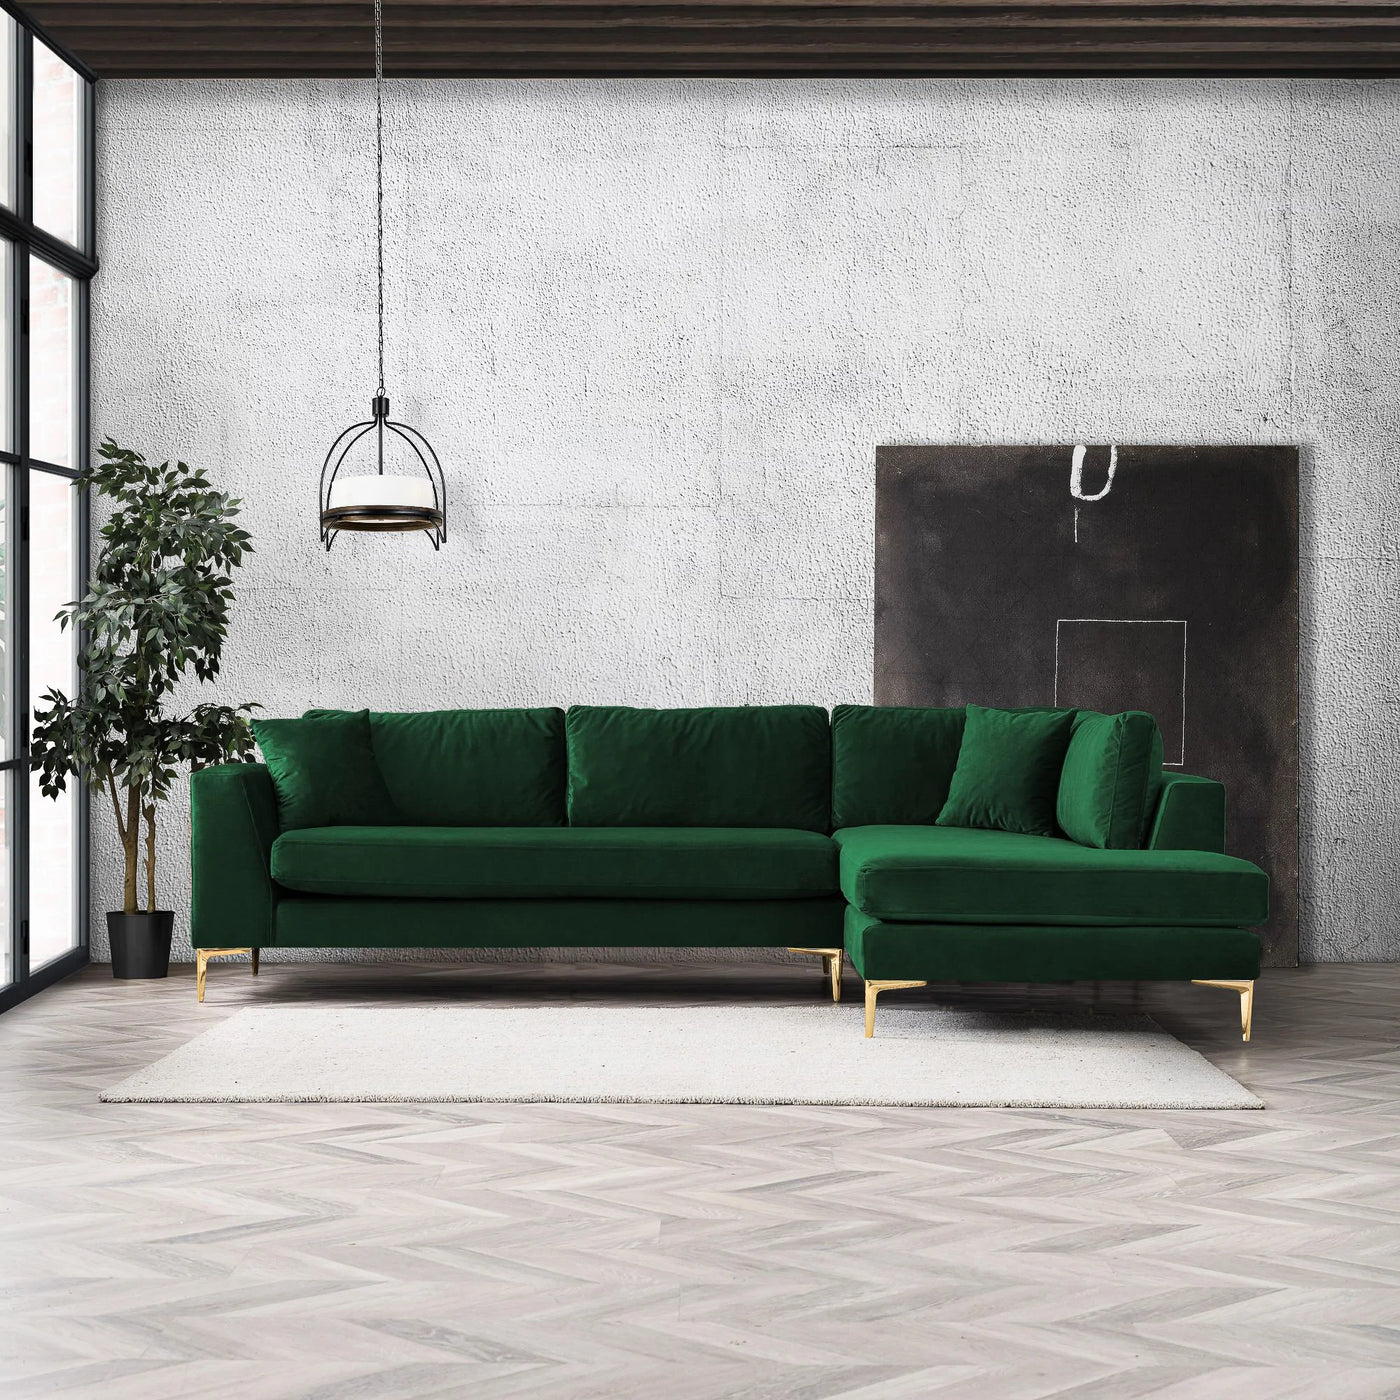 Mid-Century Modern Emerald Green with Gold Accents Sectional Sofa - Left or Right Chaise